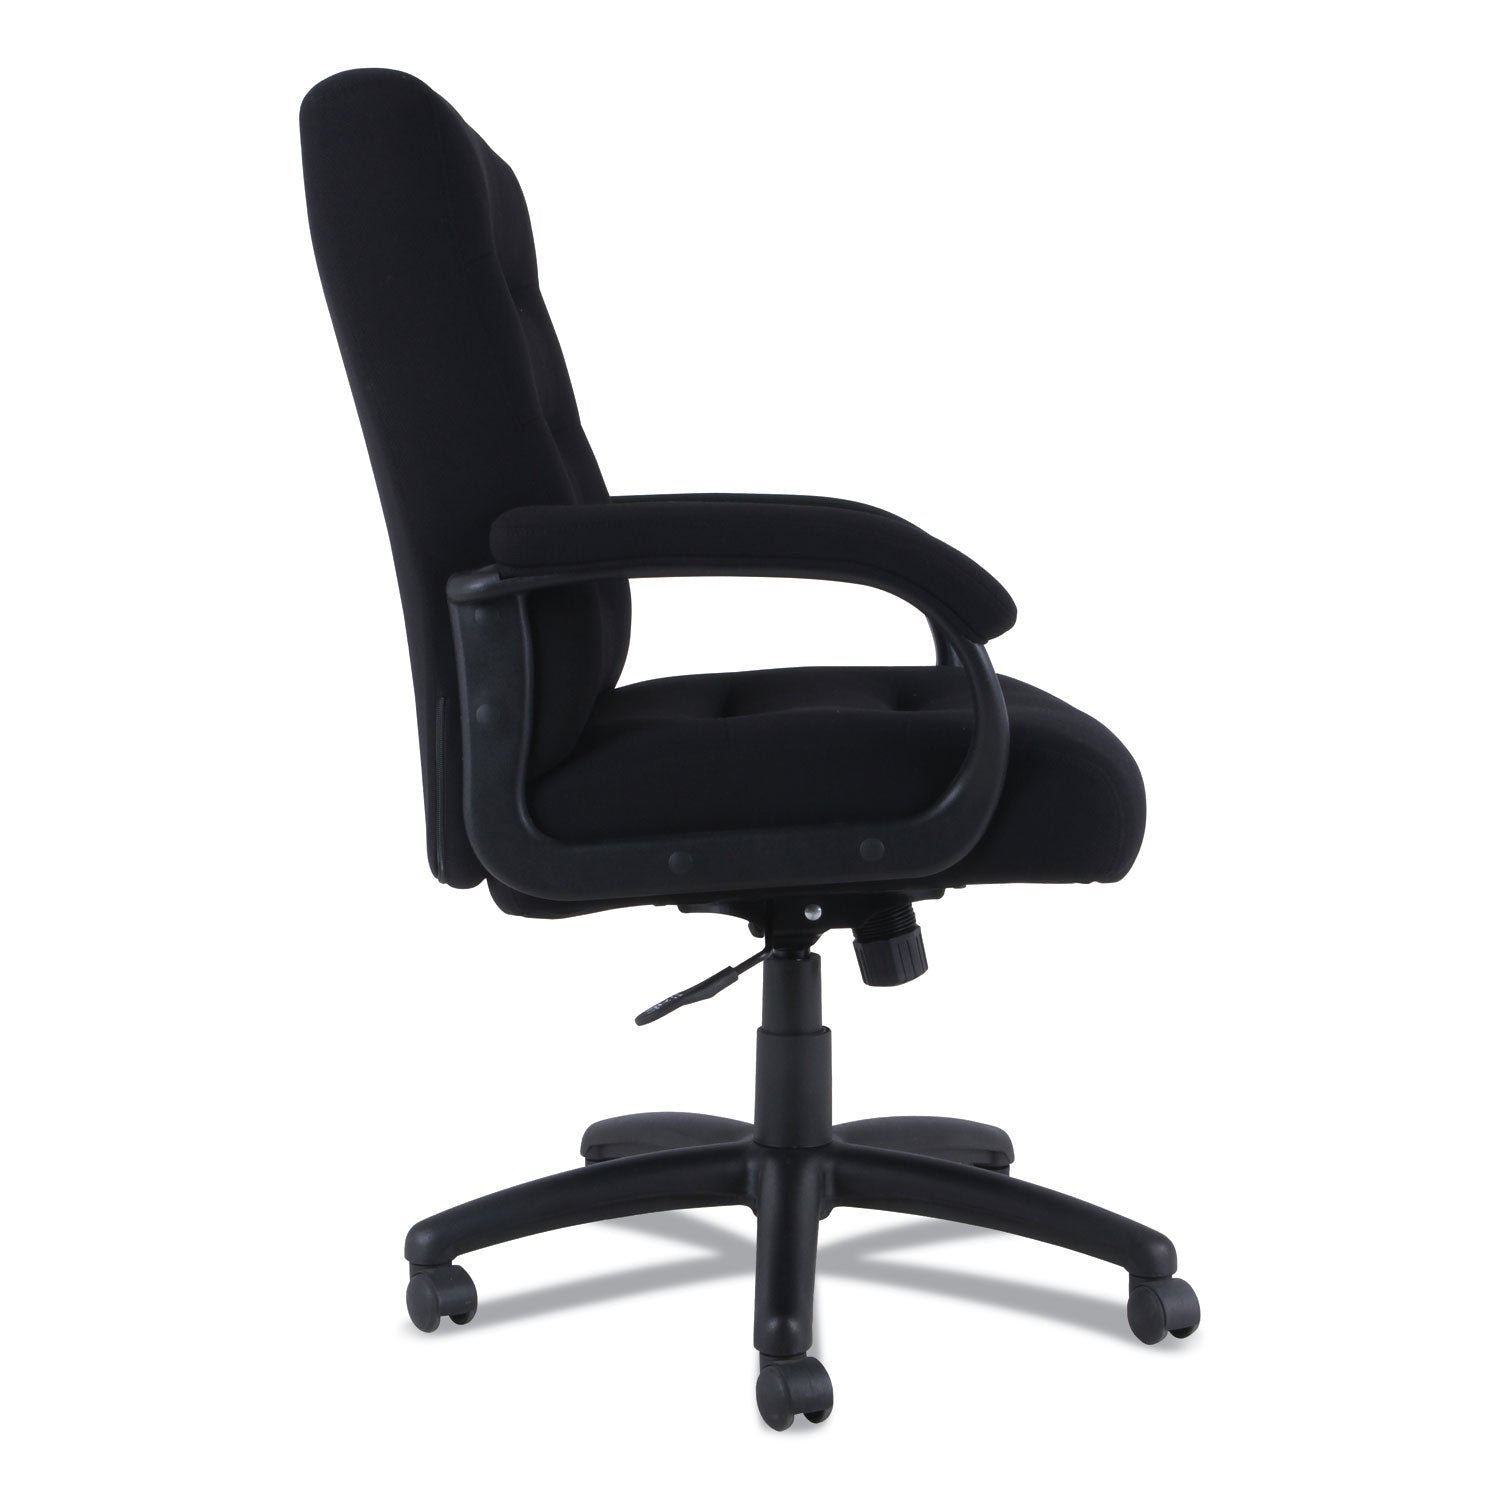 alera-kesson-series-mid-back-office-chair-supports-up-to-300-lb-1803-to-2177-seat-height-black_aleks4210 - 3